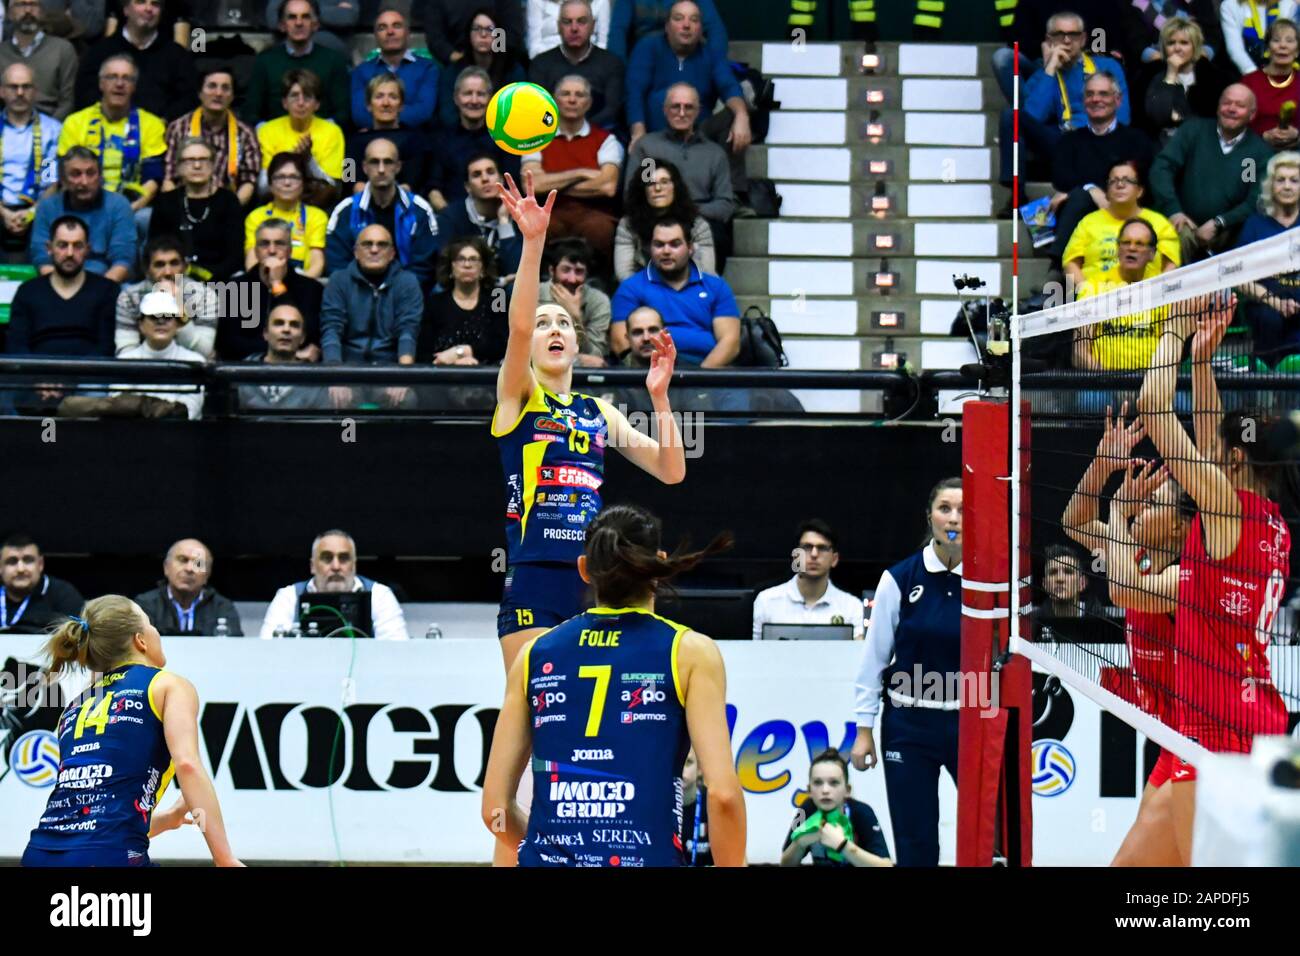 spike of kimberly hill during Imoco Volley Conegliano vs C.S.M. Volei Alba  Blaj, Treviso, Italy, 22 Jan 2020, Volleyball Volleyball Champions League W  Stock Photo - Alamy